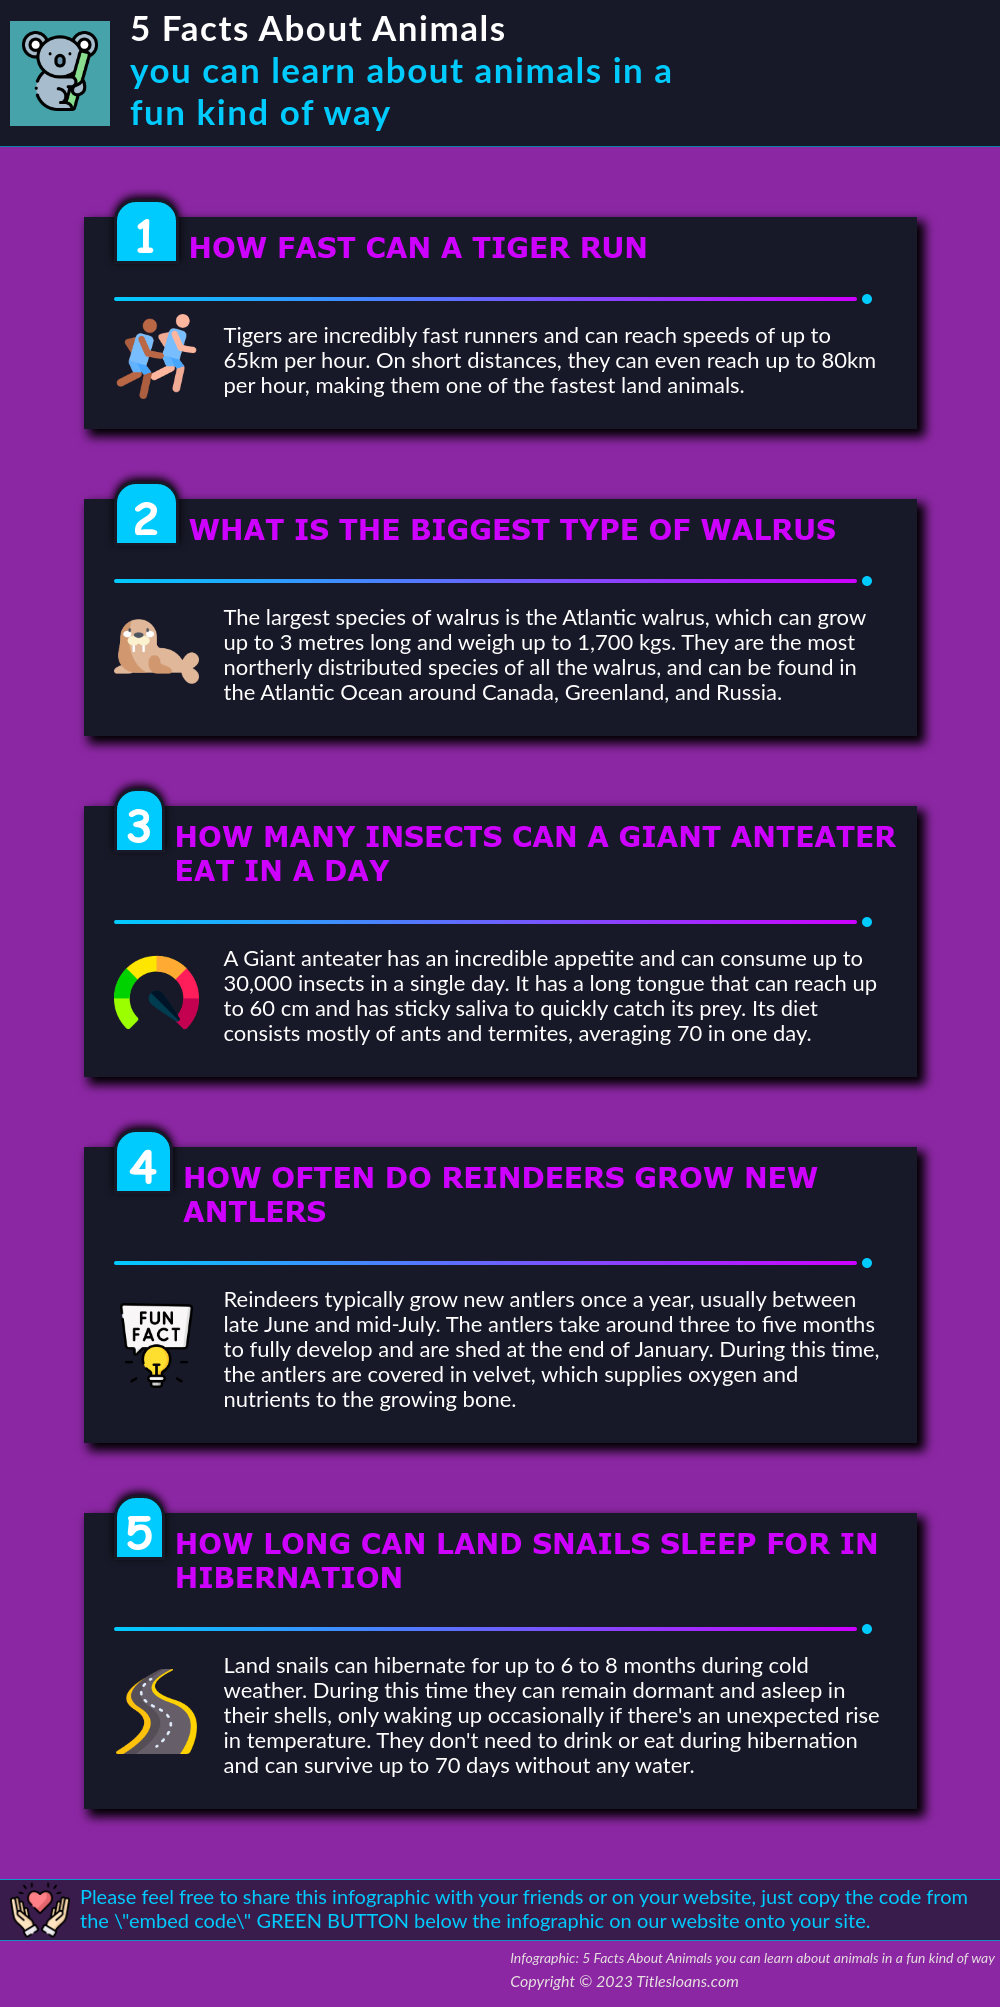 Infographic: 5 Facts About Animals you can learn about animals in a fun kind of way